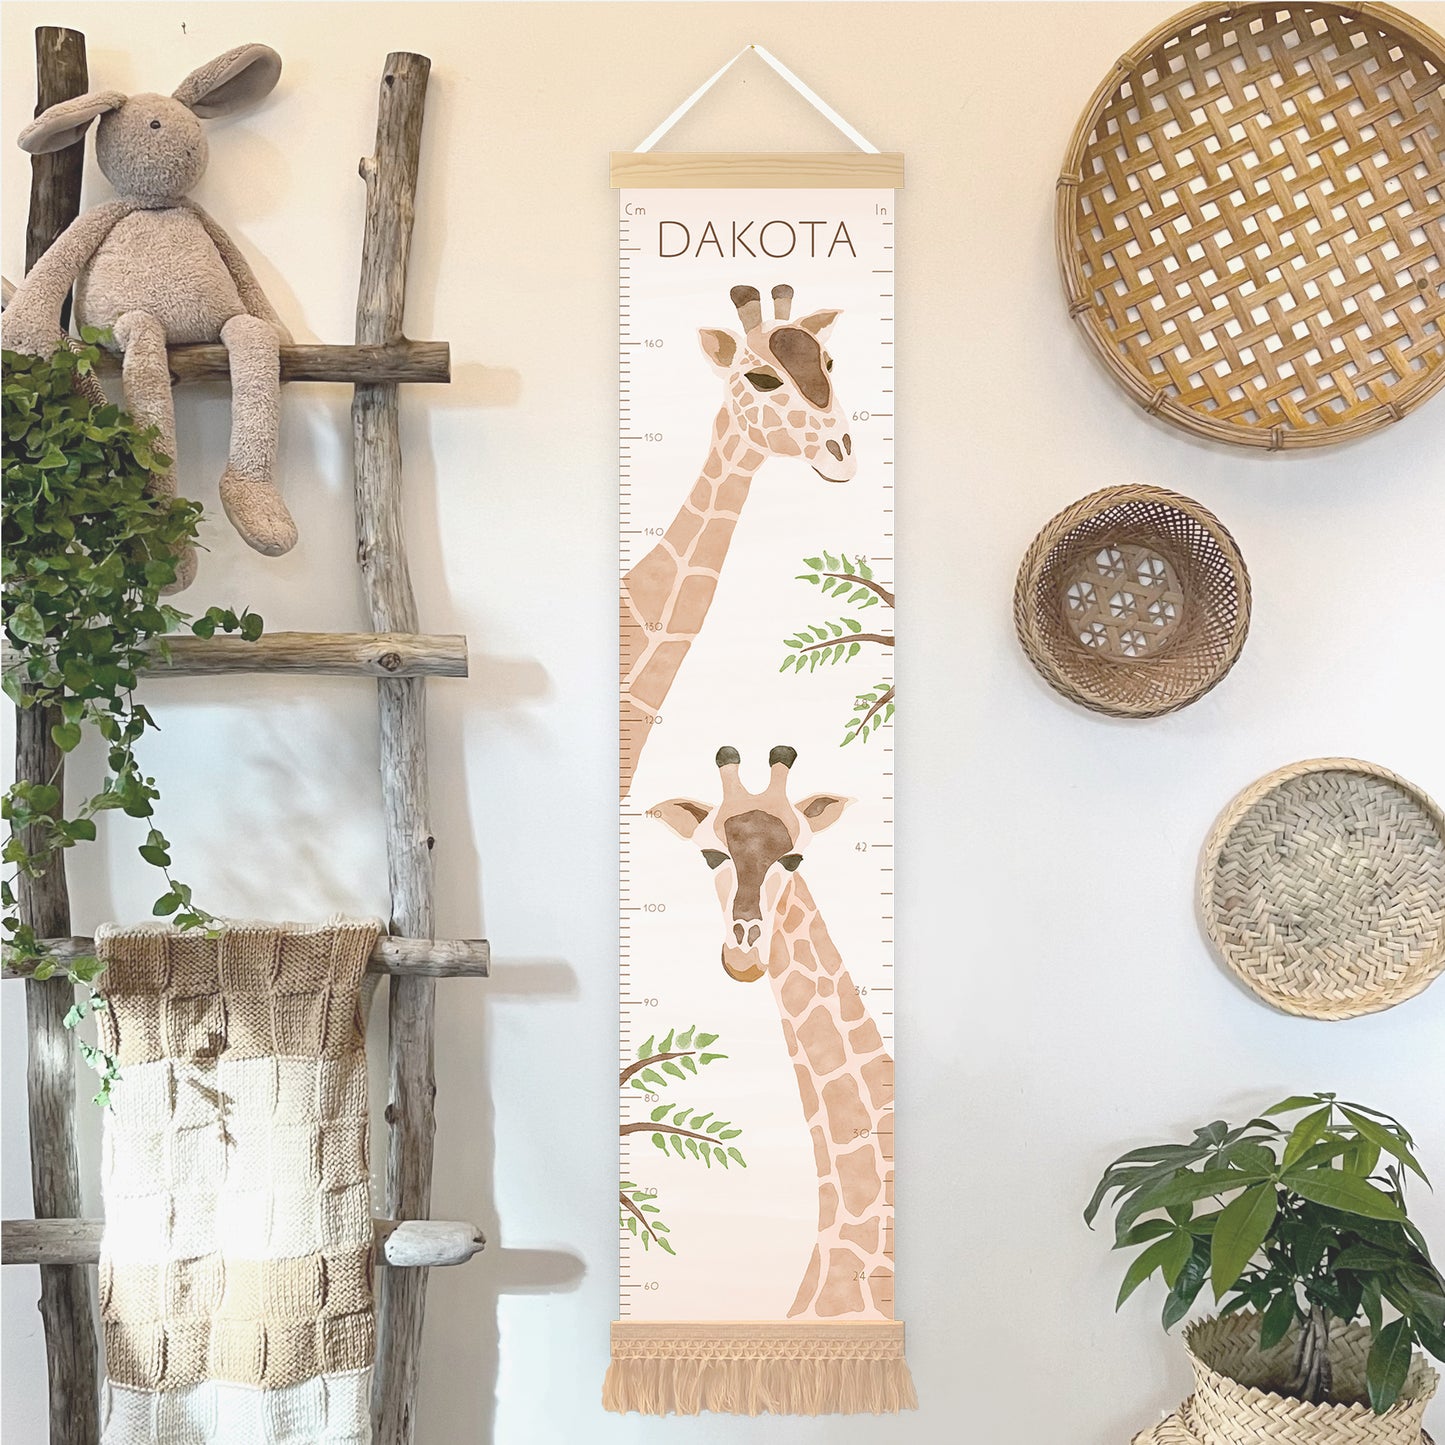 Personalized Growth Chart for Kids | Giraffe Height Chart